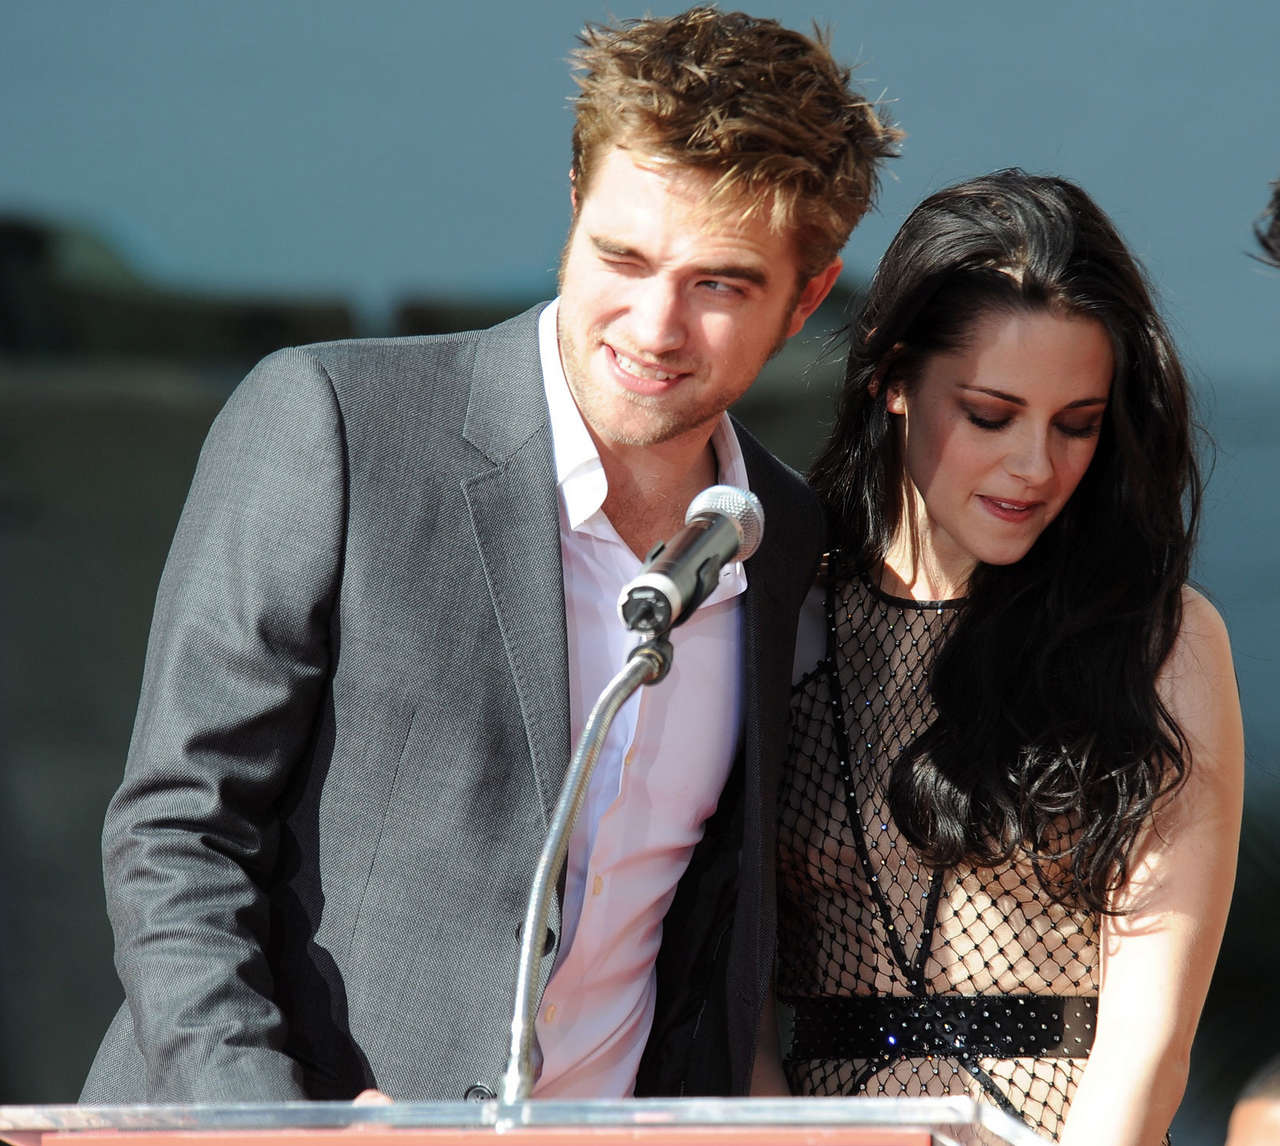 Kristen Stewart At Twilight Walk Of Fame Ceremony In Hollywood